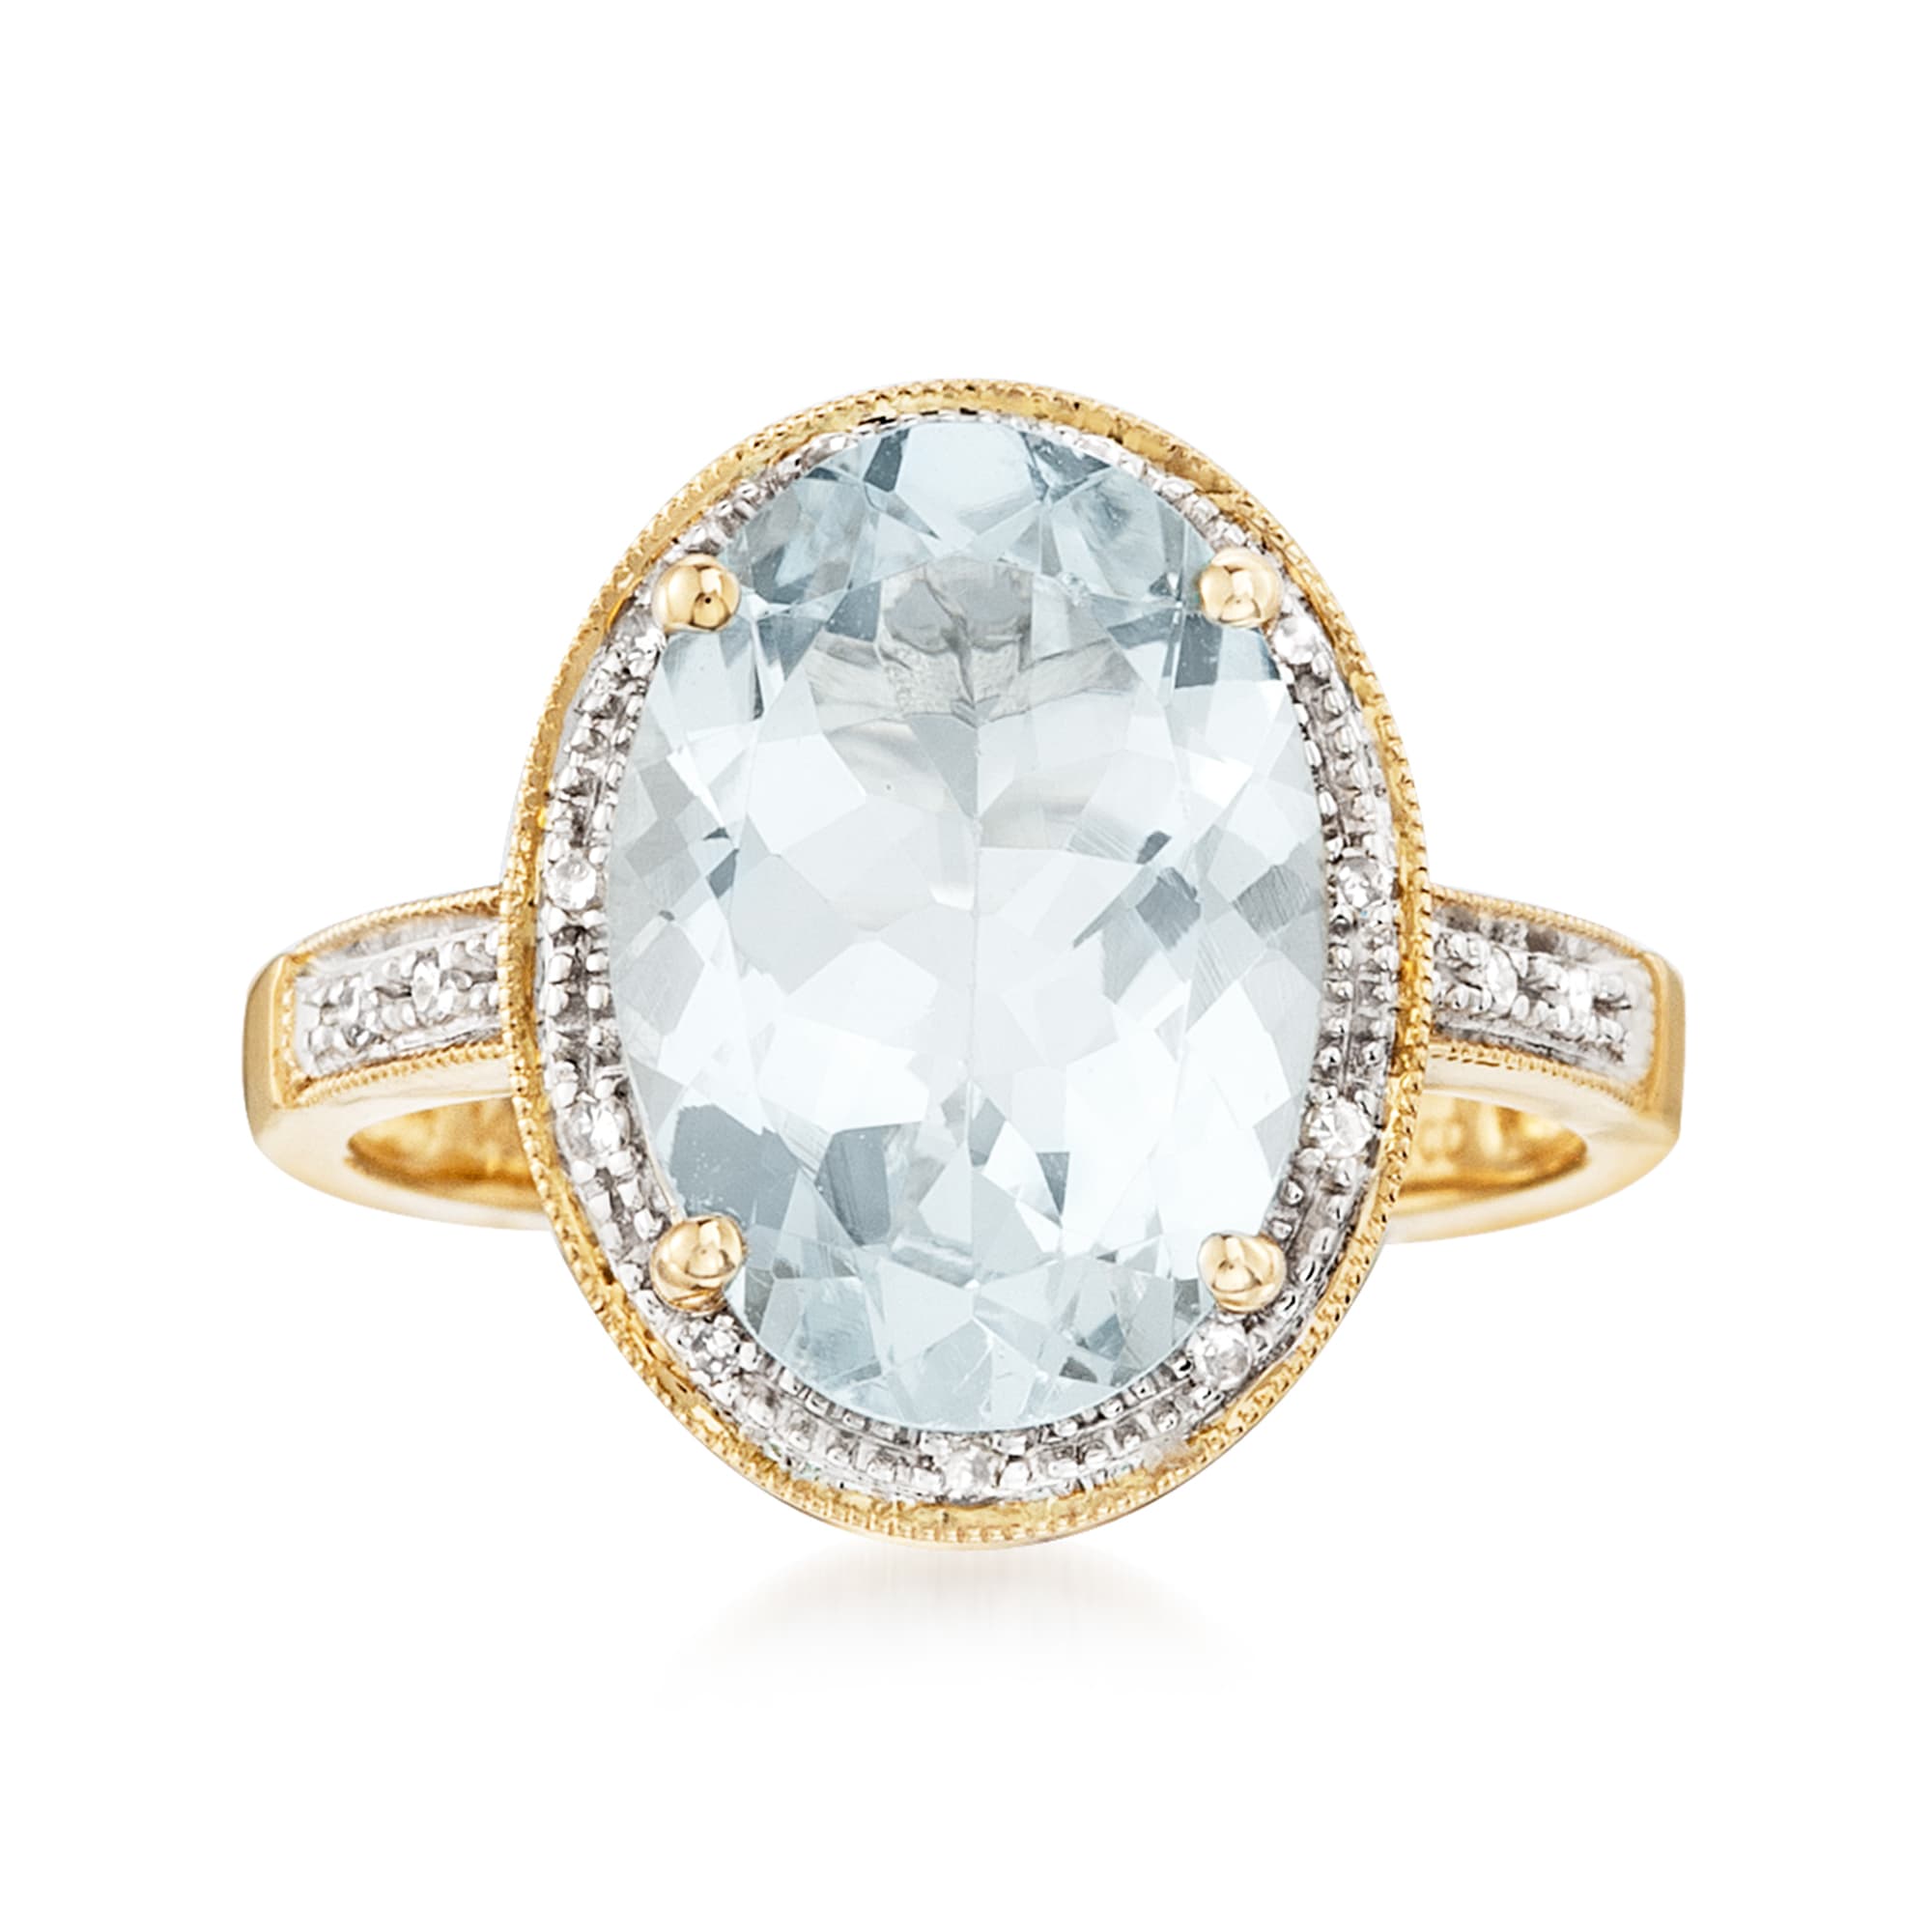 4.20 Carat Aquamarine Ring with Diamond Accents in 14kt Yellow Gold ...